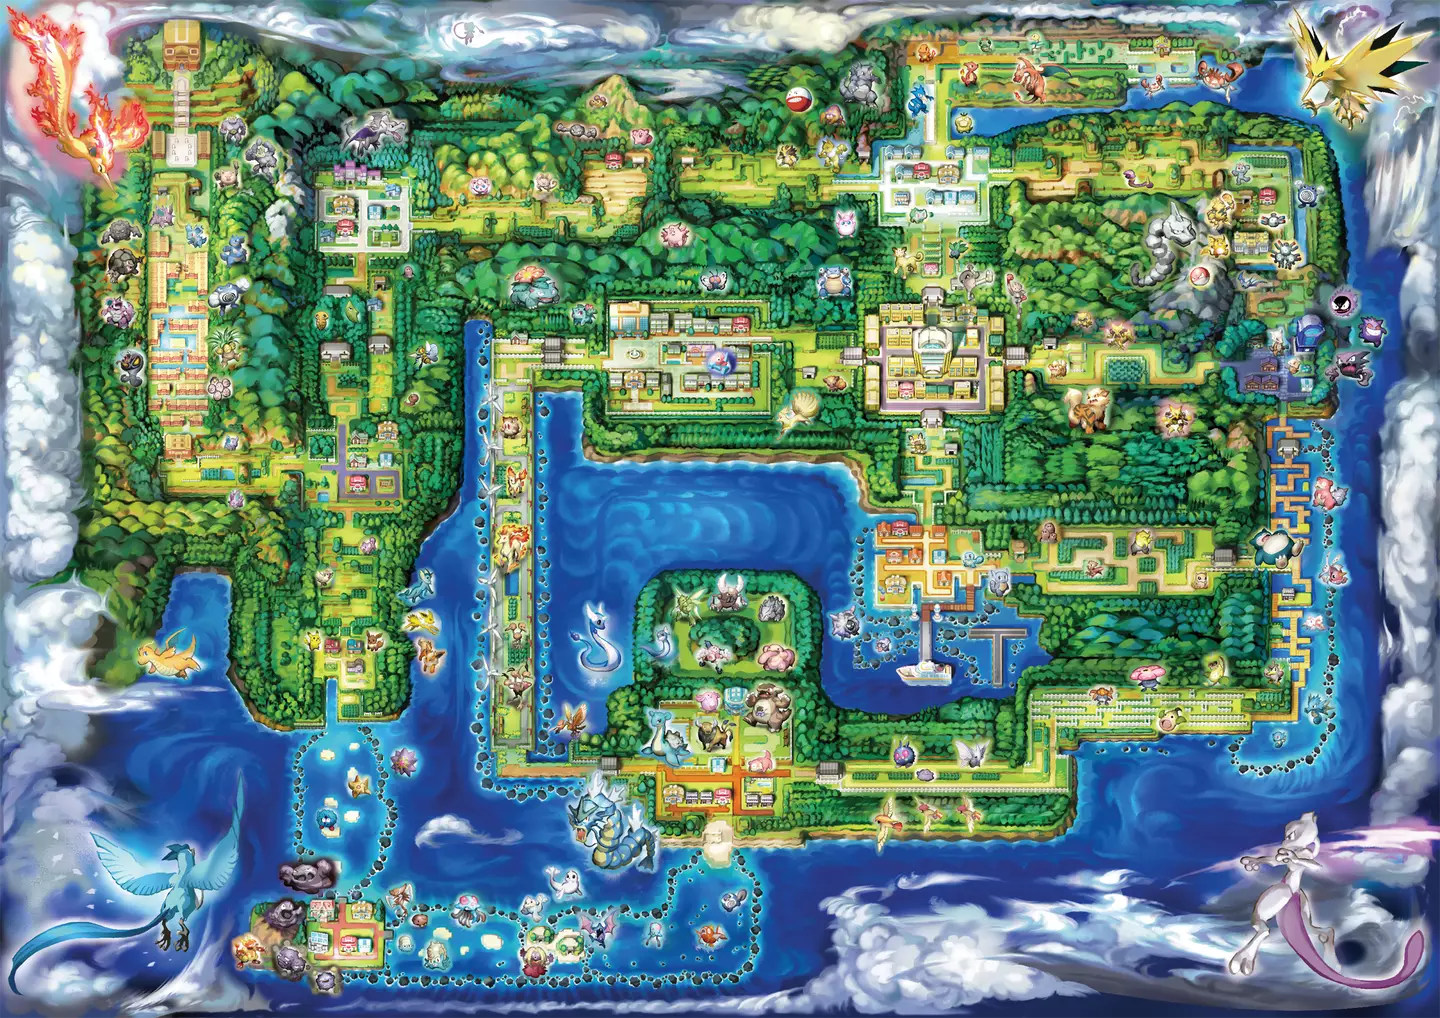 Here's Let's Go Pikachu and Eevee's map of Kanto. Very green. /